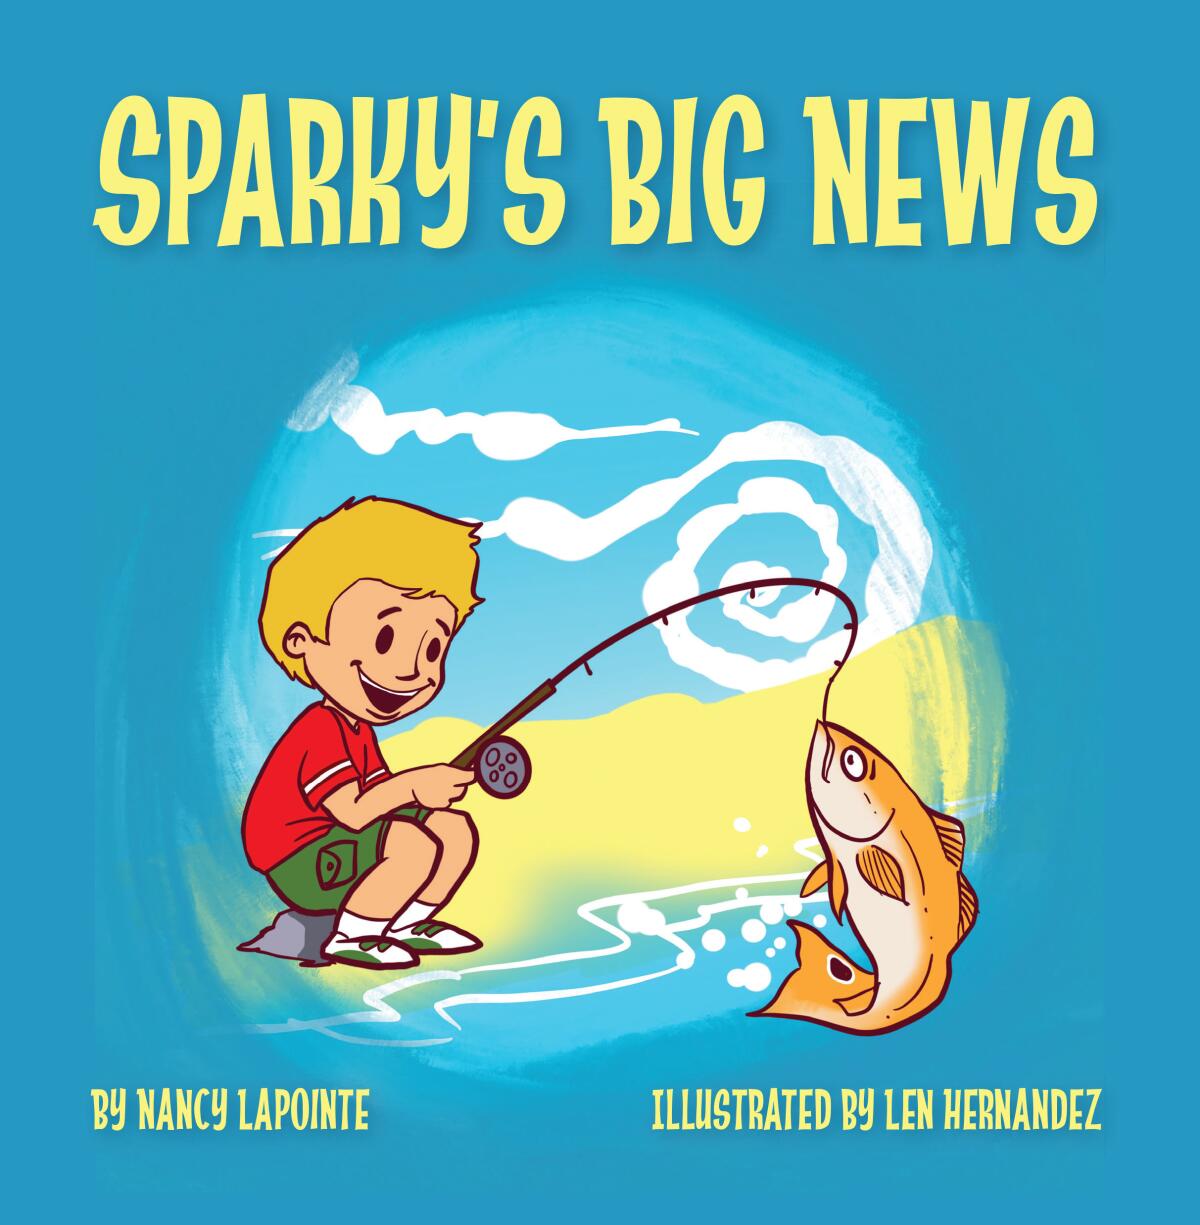 Nancy Lapointe of Escondido is the author of "Sparky's Big News."